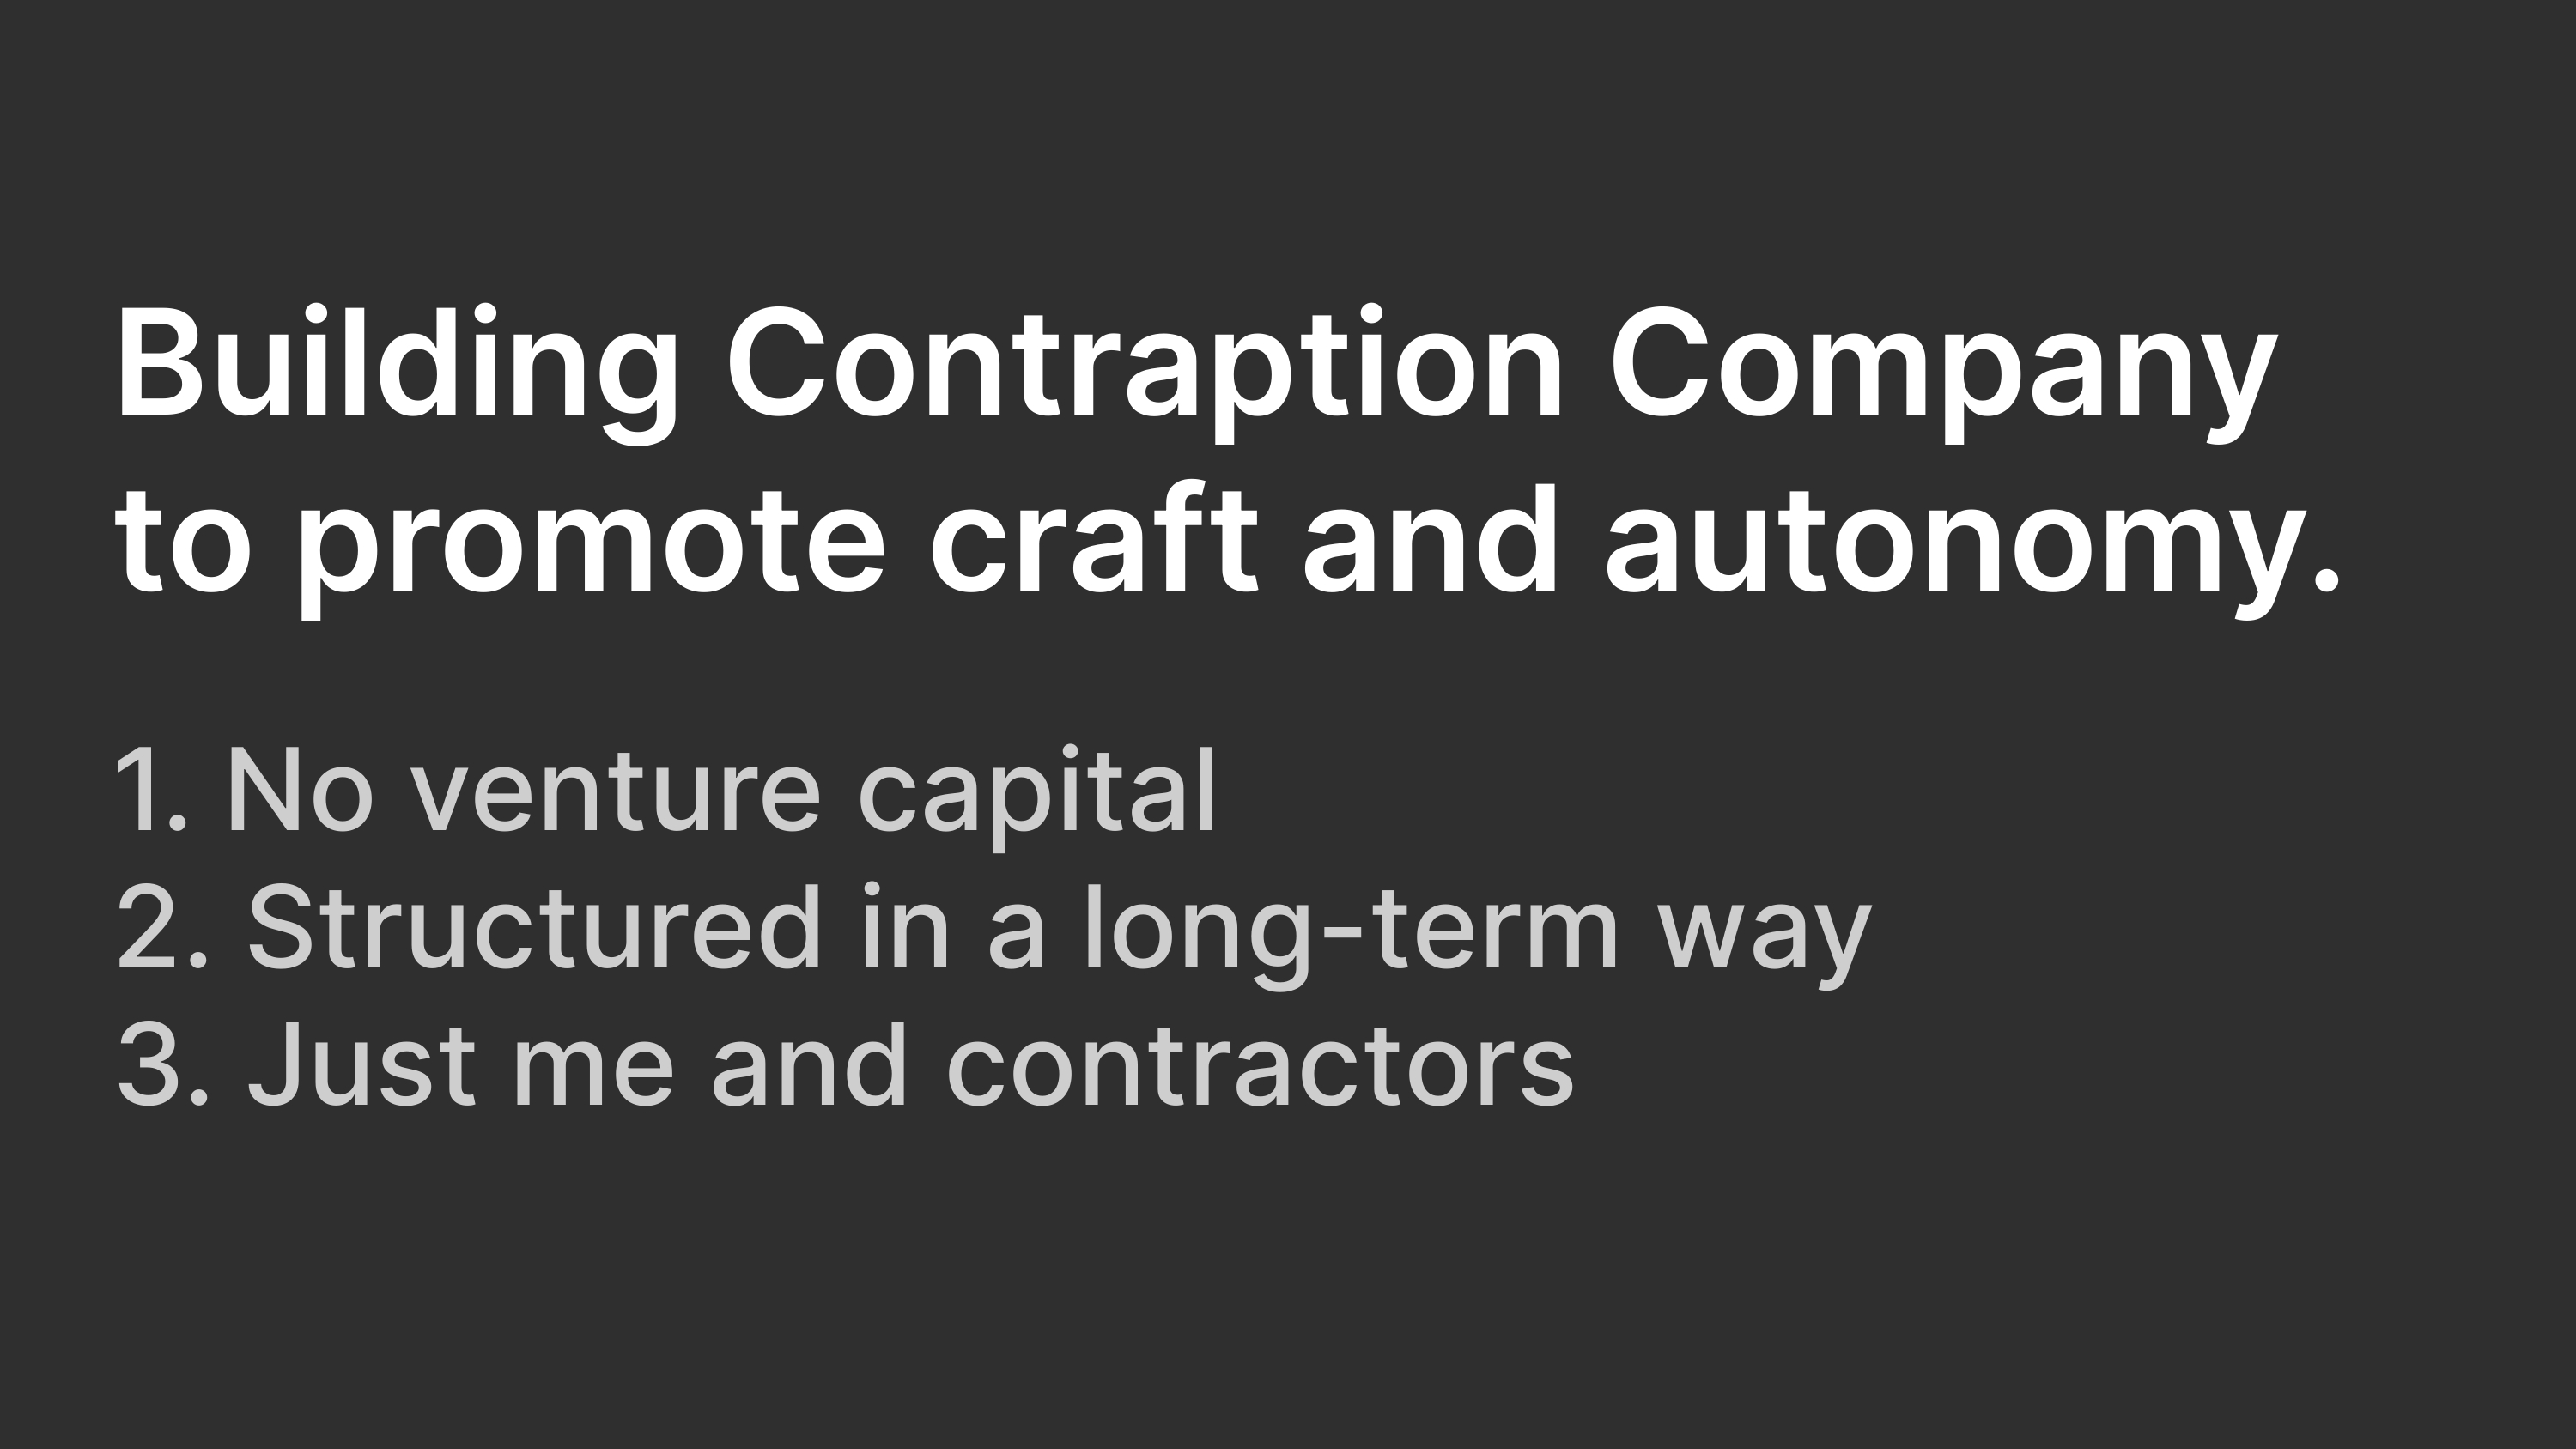 I'm building Contraption Company to promote craft and autonomy.